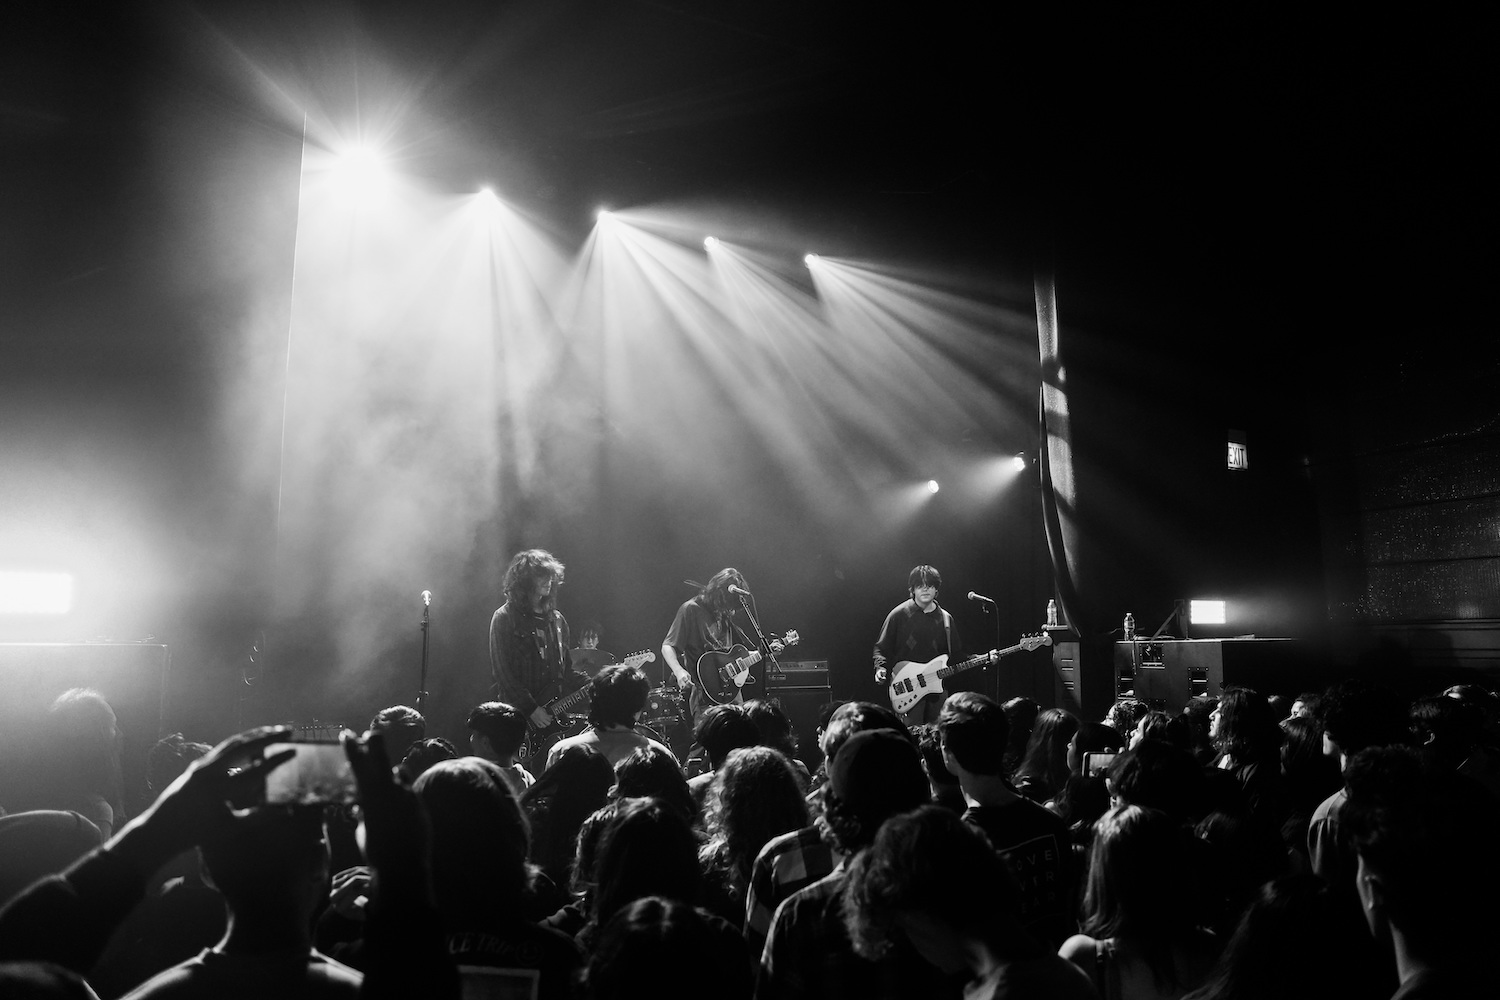 Band playing on a stage in front of a large crowd in black & white 